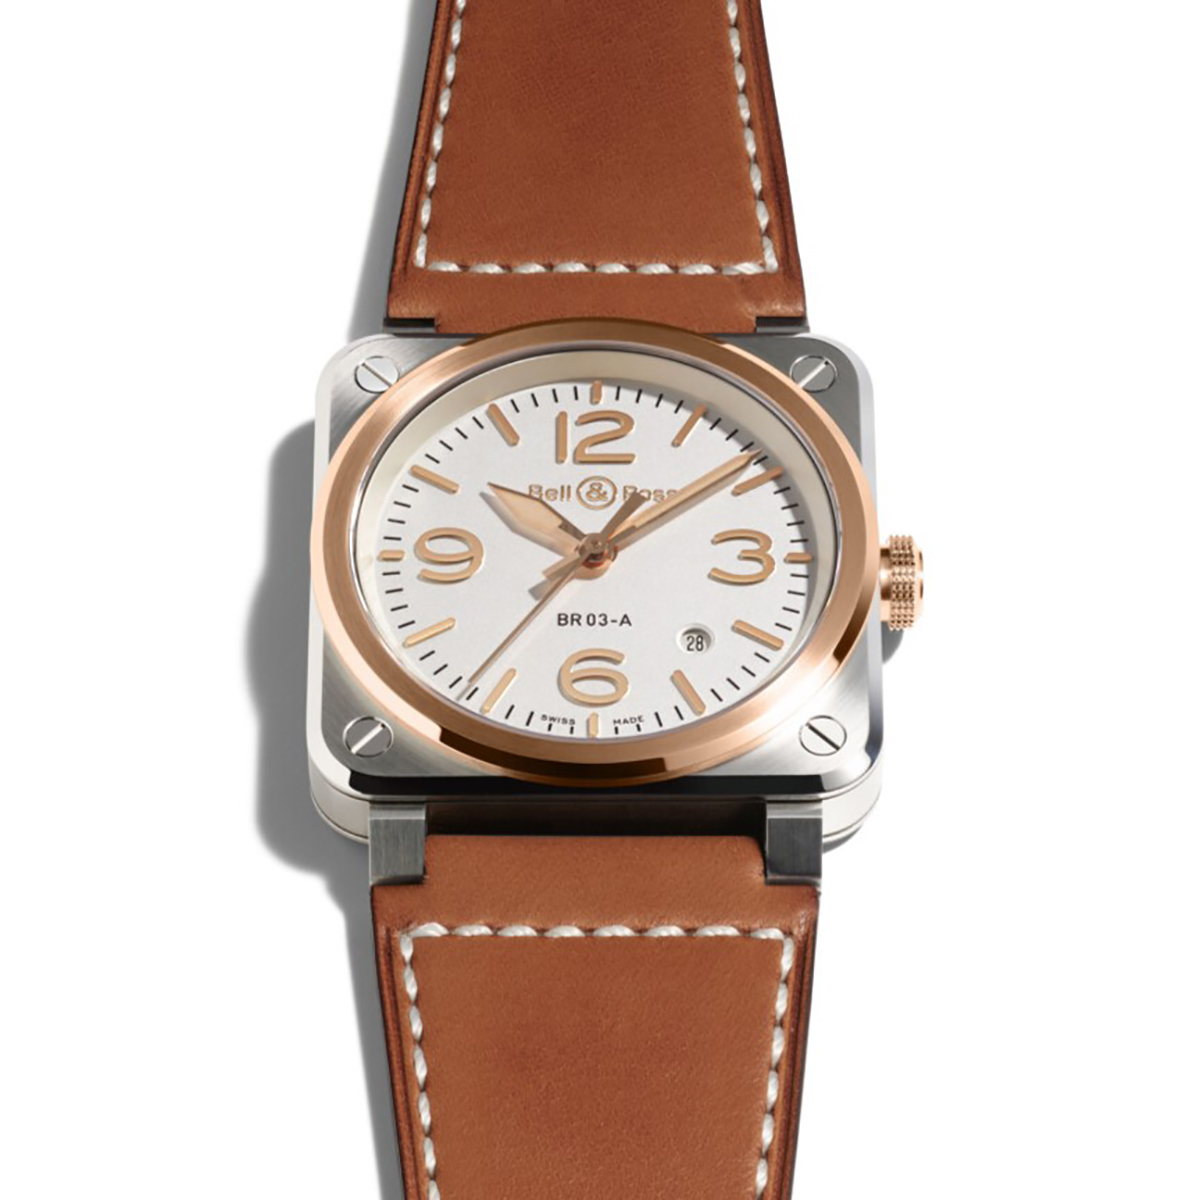 Cortina-WatchBell-Ross-BR-03-White-Steel_Gold_watch